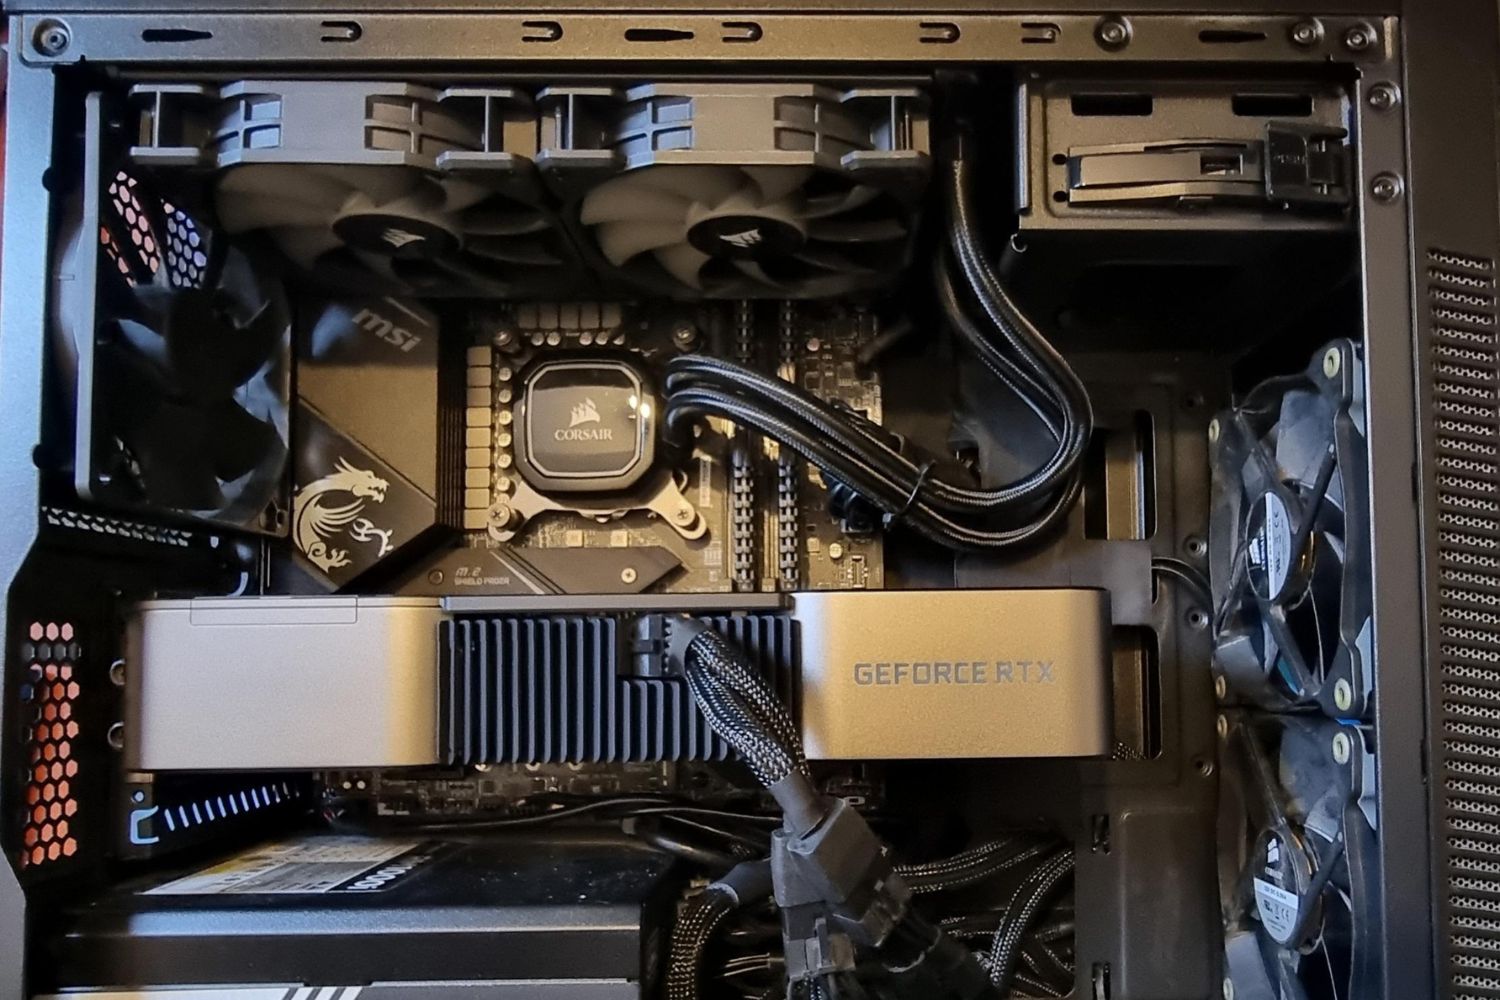 How To Mount A CPU Cooler Without Mounts